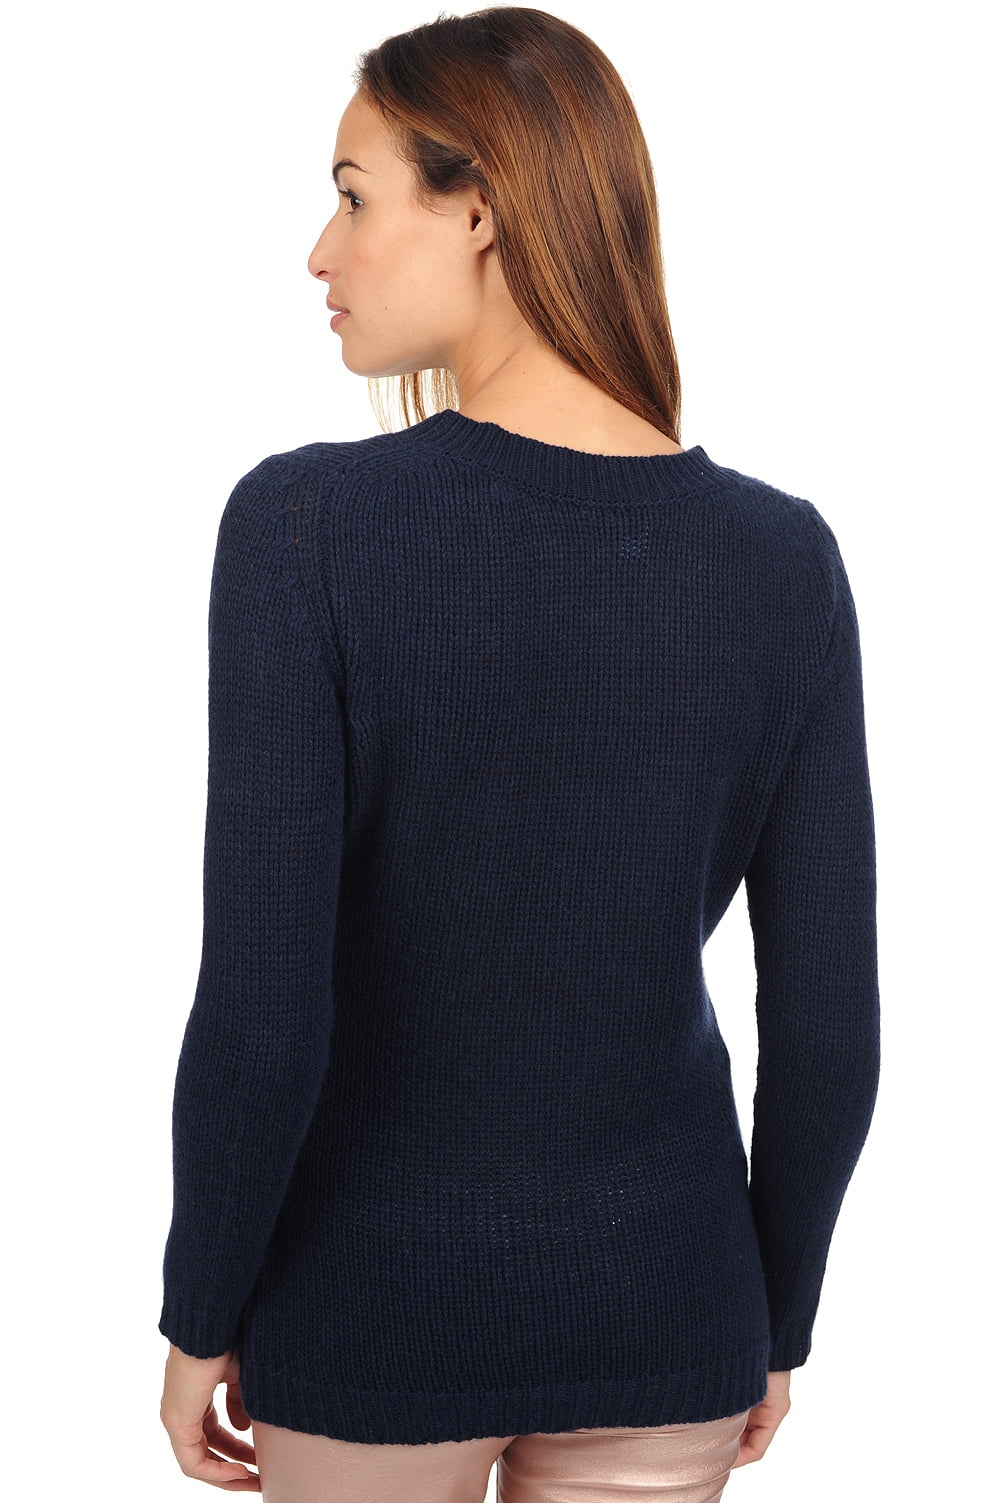 Cashmere ladies chunky sweater marielle dress blue s